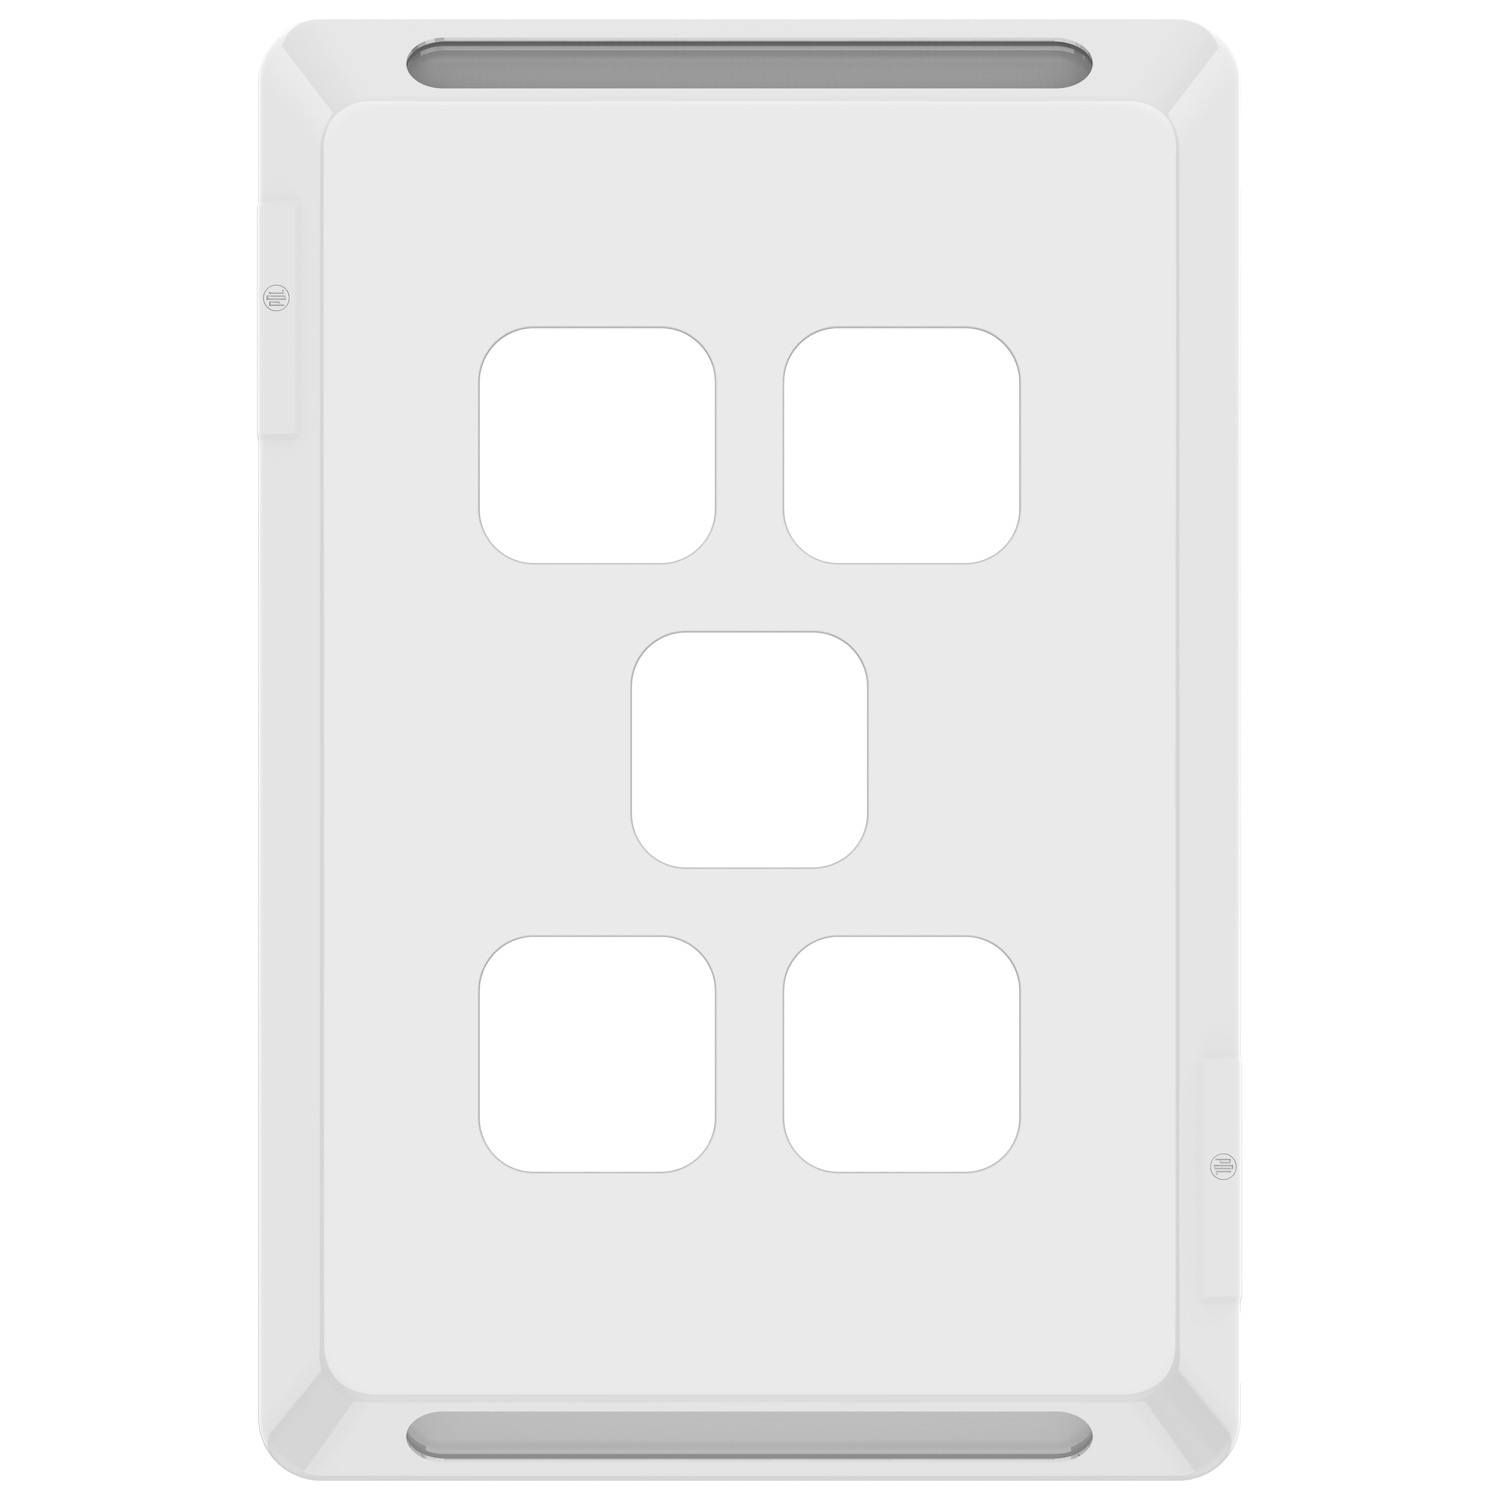 PDL Pro Series - Grid + Cover Plate Switch 5-Gang - White